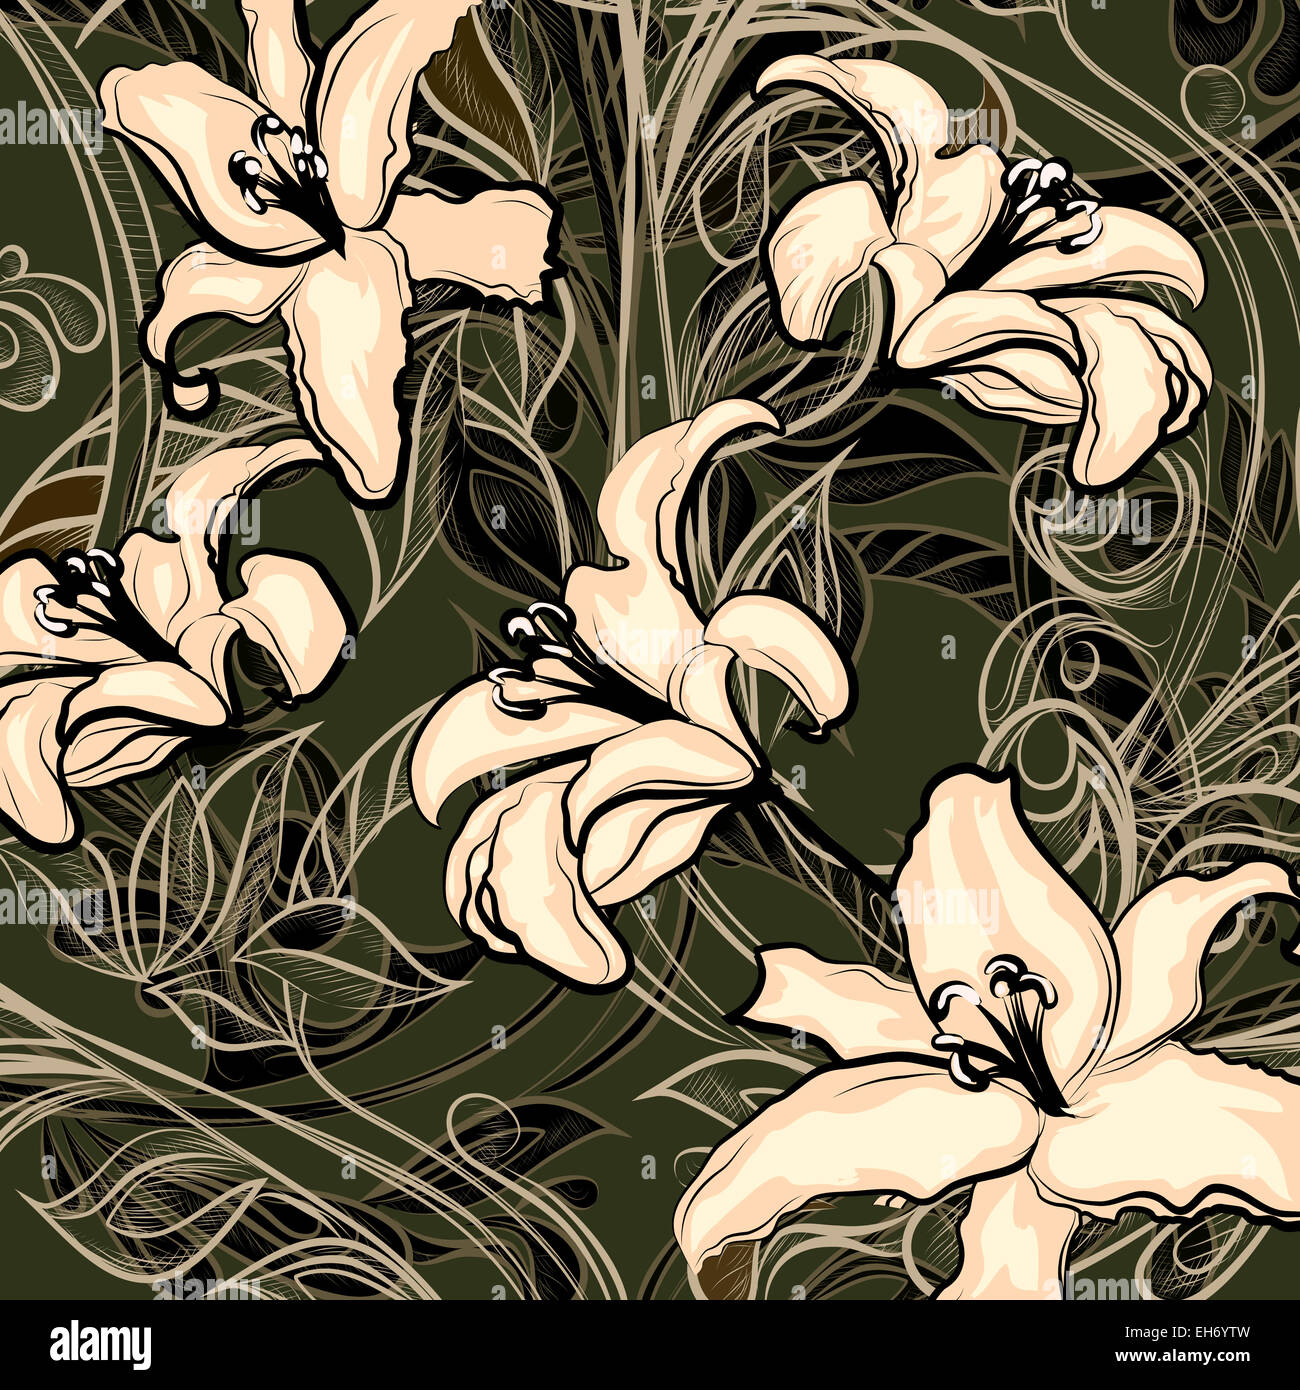 Illustration of blossoming wild lilies against dark background drawn in vintage graphic style Stock Photo